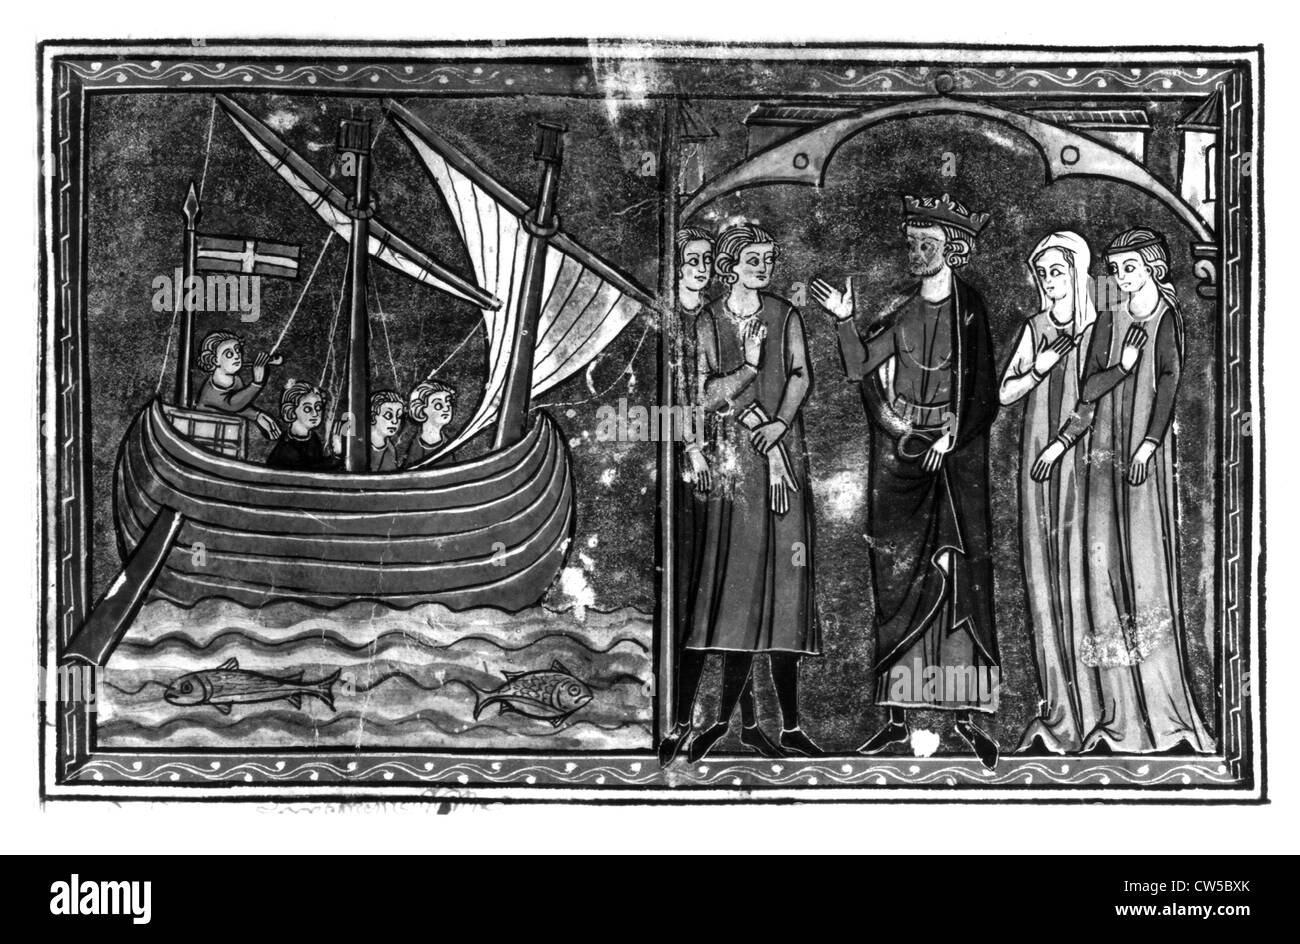 William Tyre 'History Deeds done beyond Sea' Accra ca 1275 f° 125 v° Book 11 chap 1 Bohémond sailing towards France King Philip Stock Photo